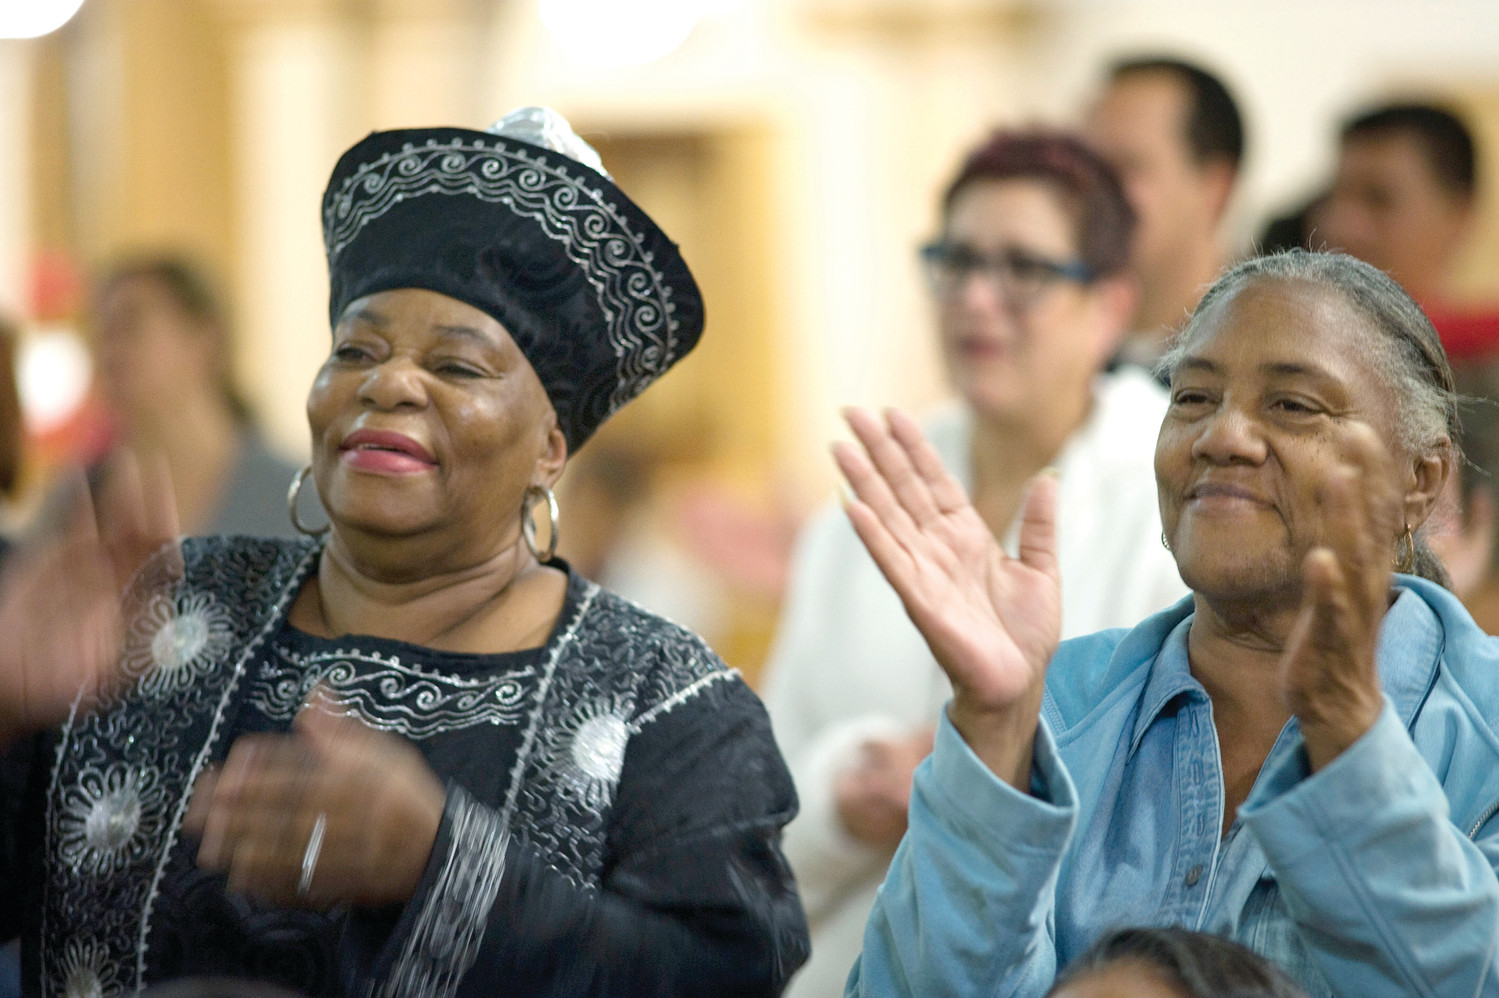 Worshippers clap and sing on the second evening of an African-American Catholic revival celebration Feb. 6 at St. Rita's Catholic Church in San Diego. The revival was organized by San Diego's Diocesan Commission for African American Catholics as part of Black History Month, observed every February.